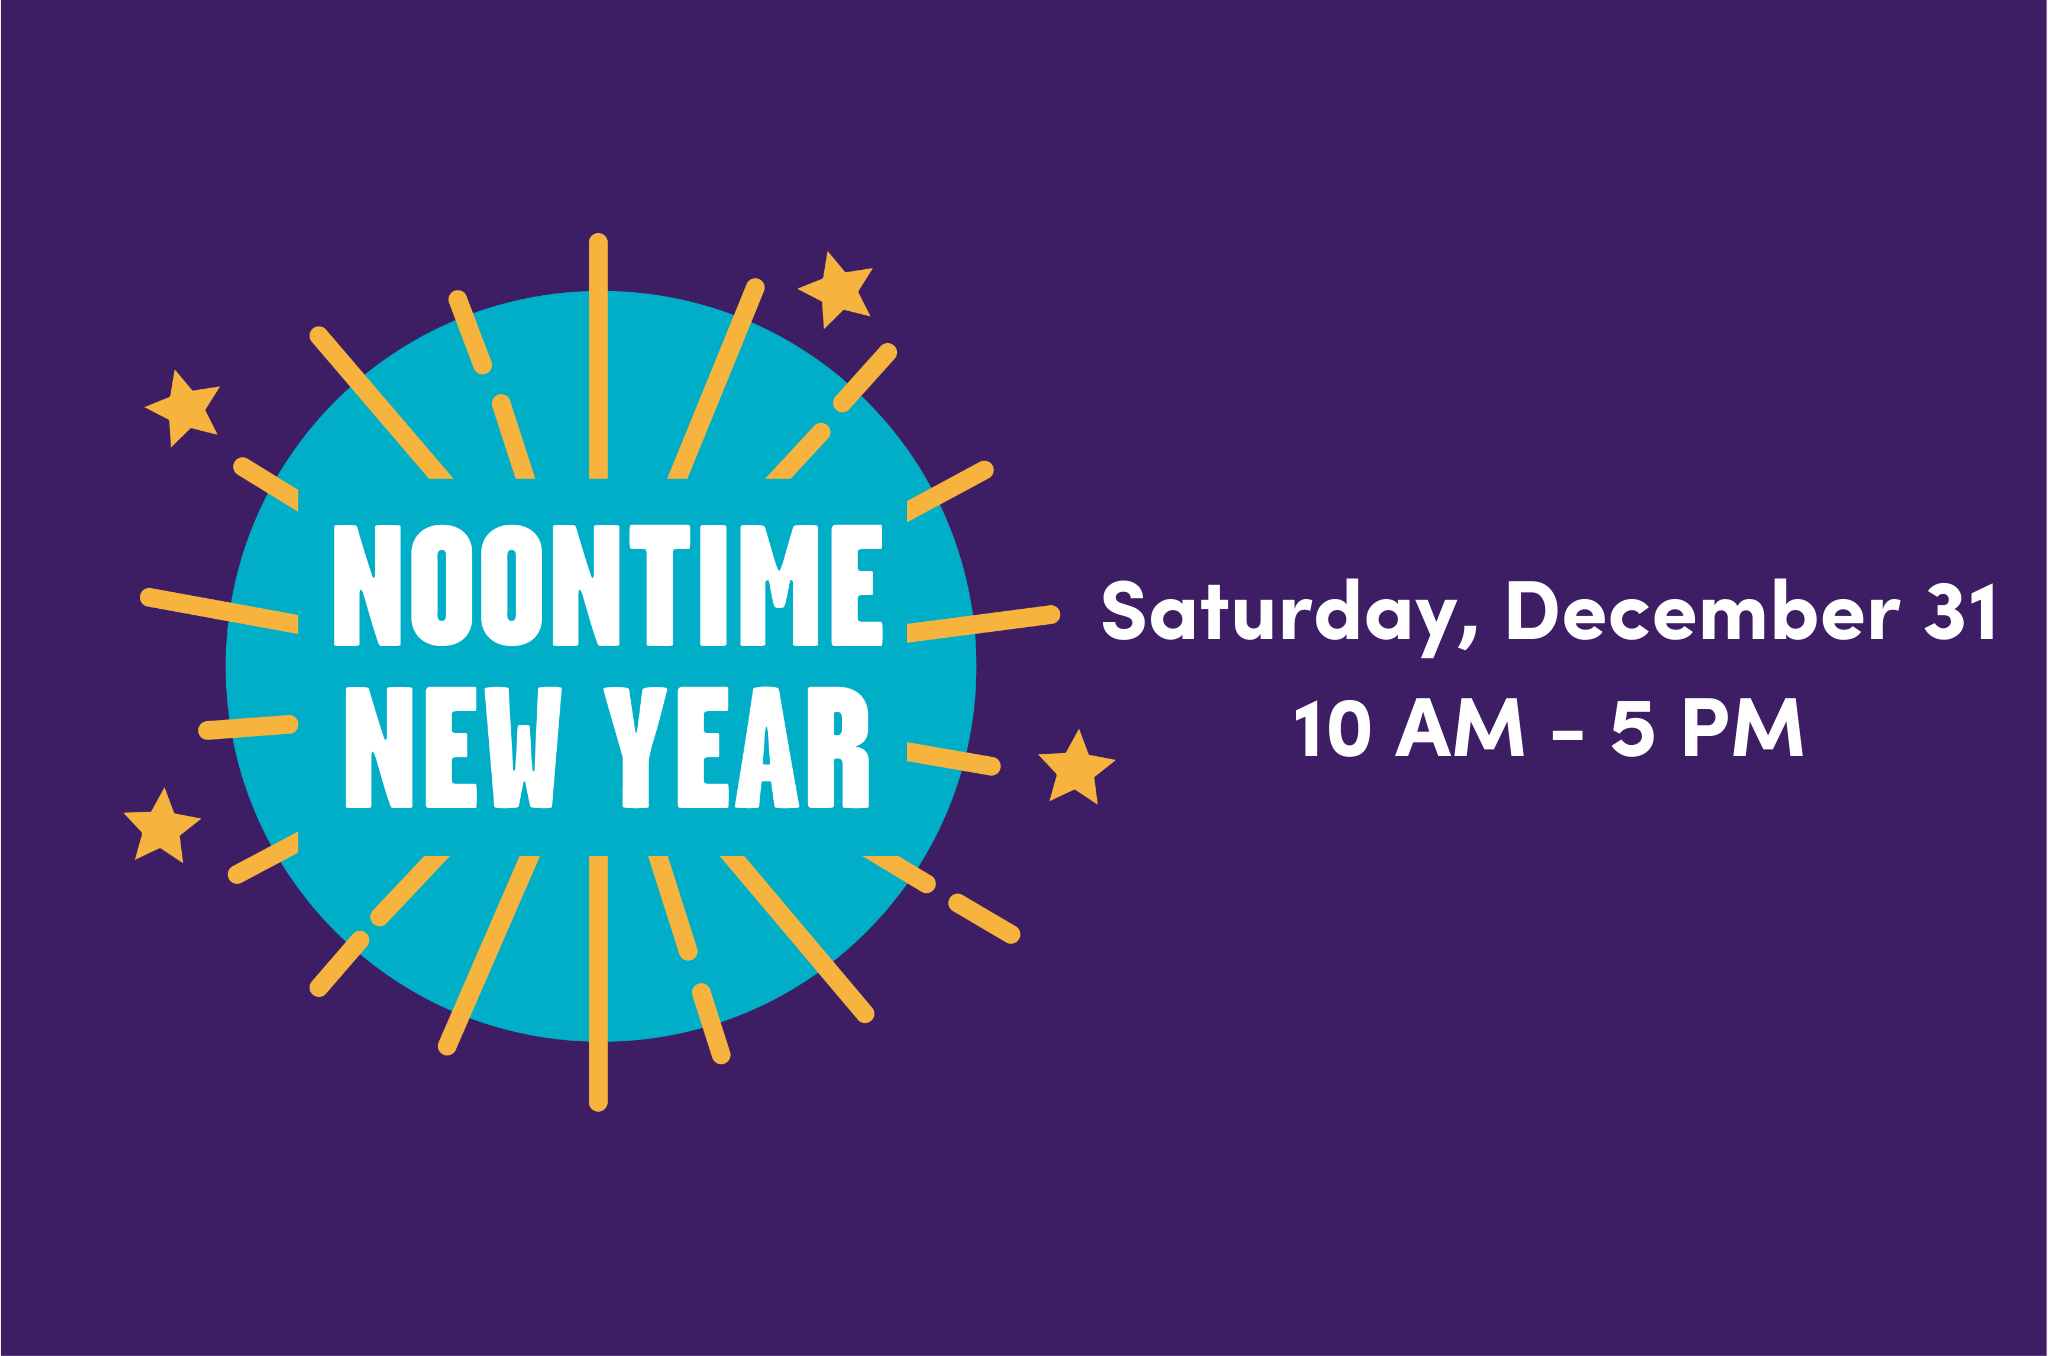 dark purple banner with a blue/gold star. Within the star it says "Noontime New Year" and next to the star it reads "Saturday, December 31 10 AM -5 PM"